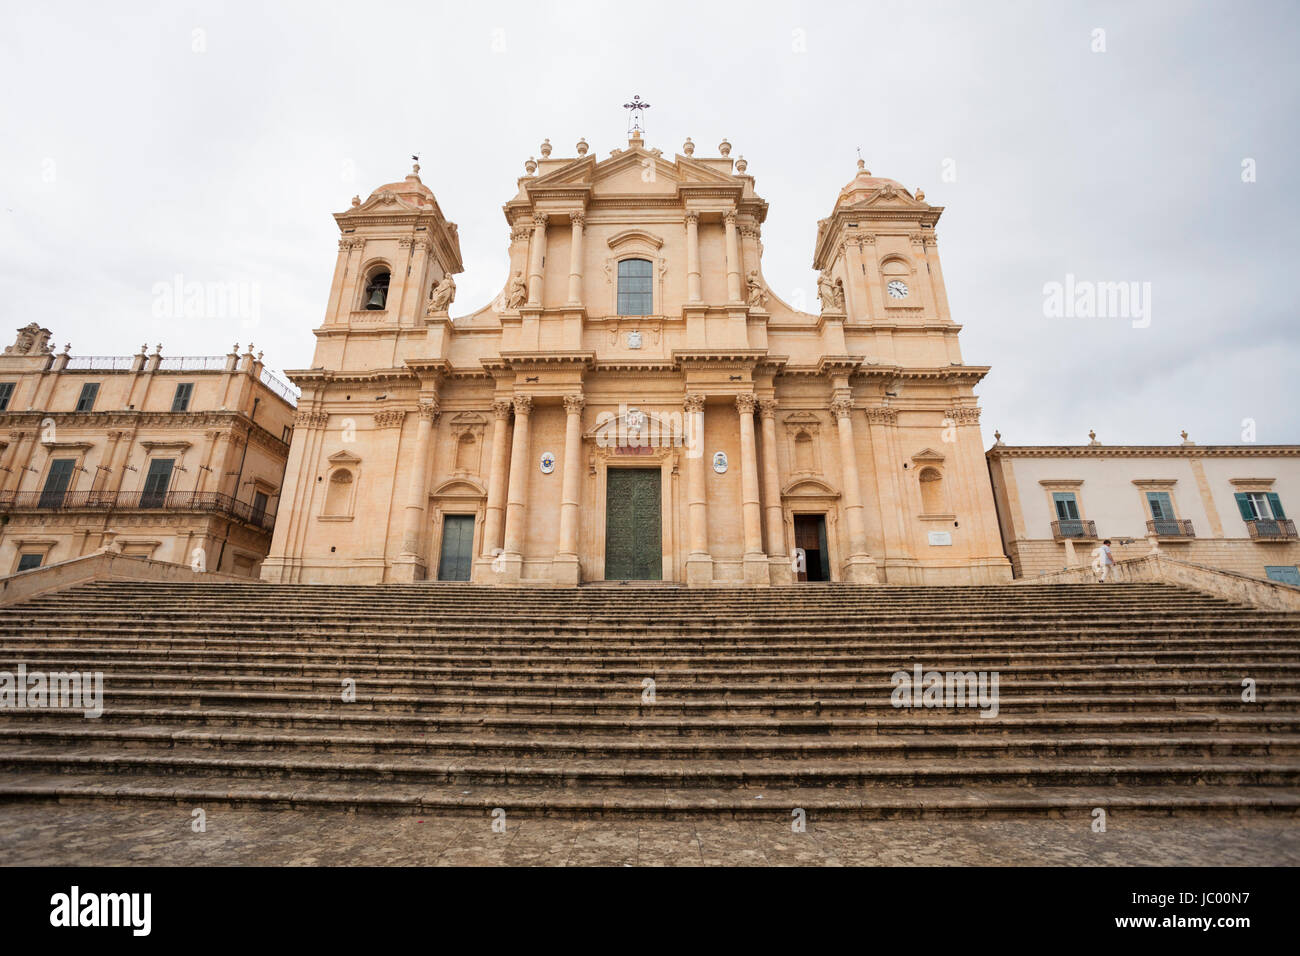 The Cathedral of Noto, a UNESCO World Heritage Site in Sicily. Stock Photo